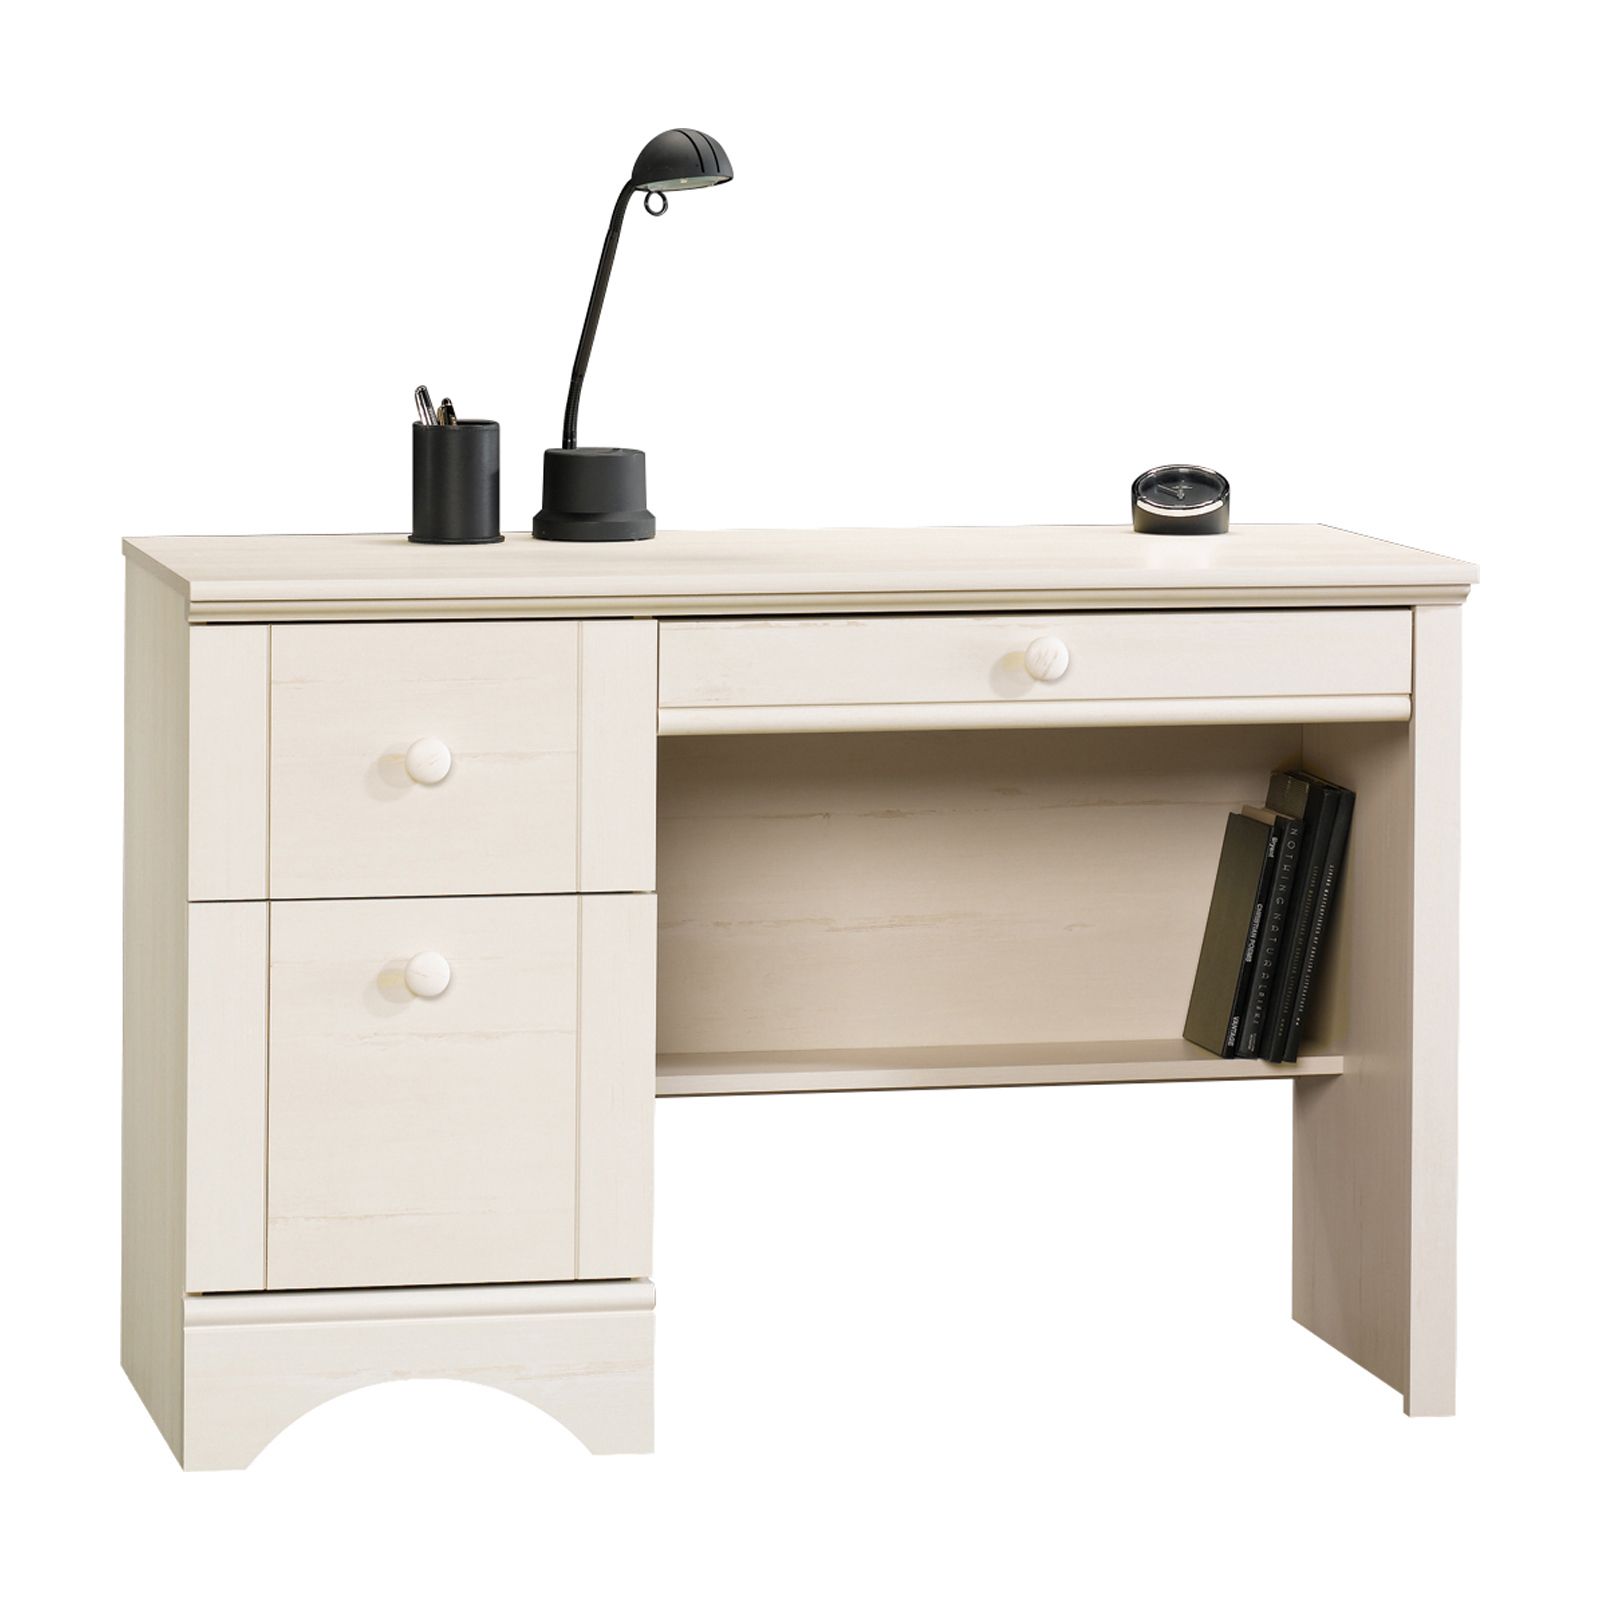 Sauder Harbor View Computer Desk – Antiqued White – Desks At Hayneedle With Regard To Off White And Cinnamon Office Desks (View 7 of 15)